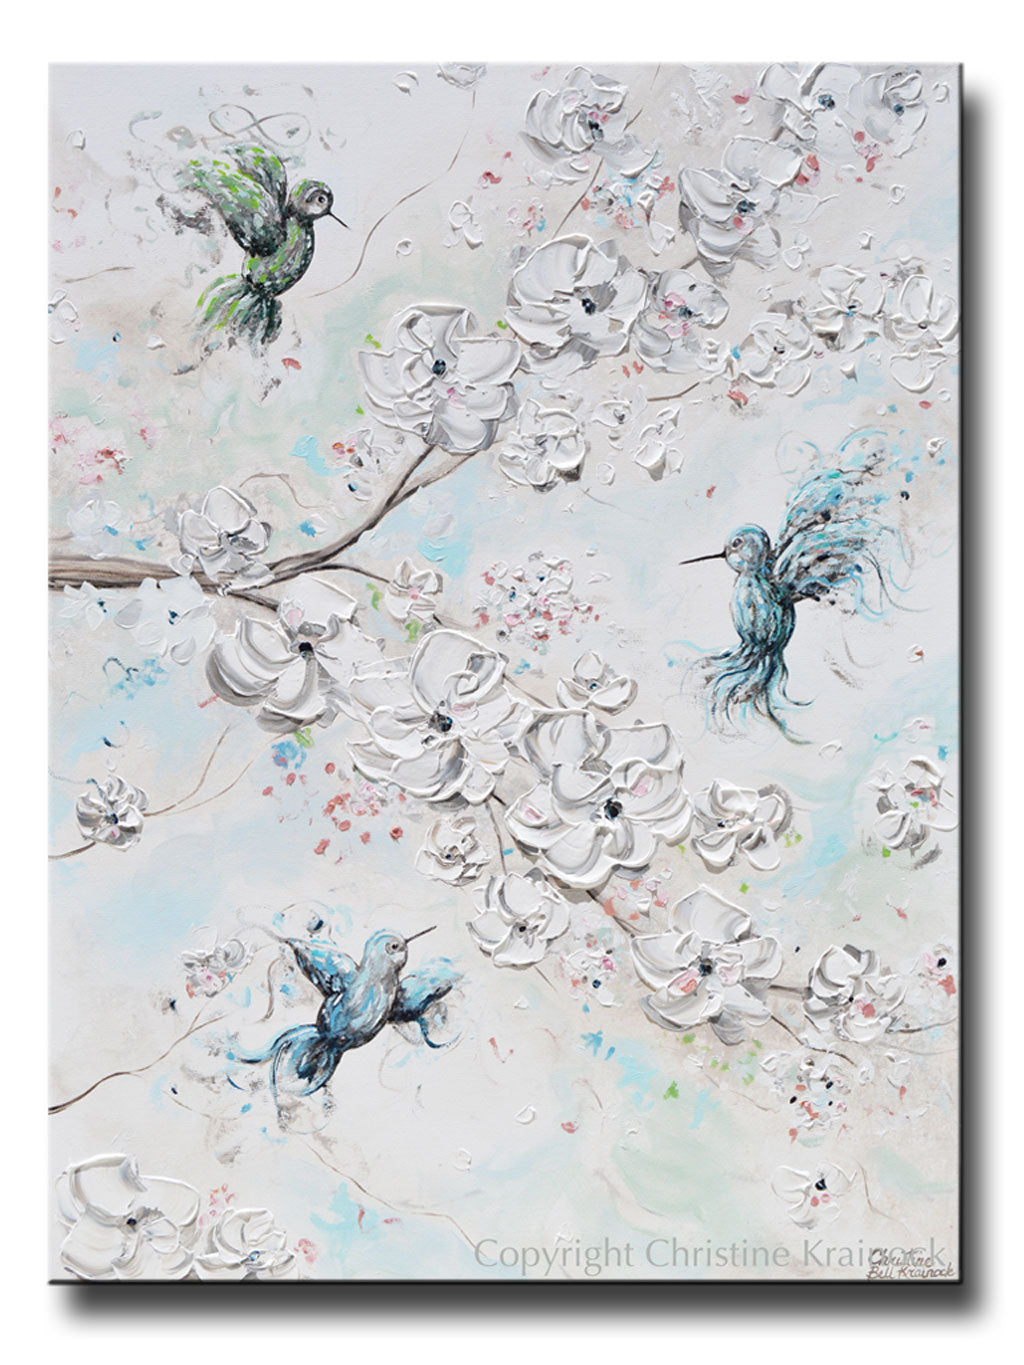 ORIGINAL Art Abstract Floral Painting Hummingbirds Cherry Blossoms Textured Blue White Green Wall Art Home Decor 30x40"